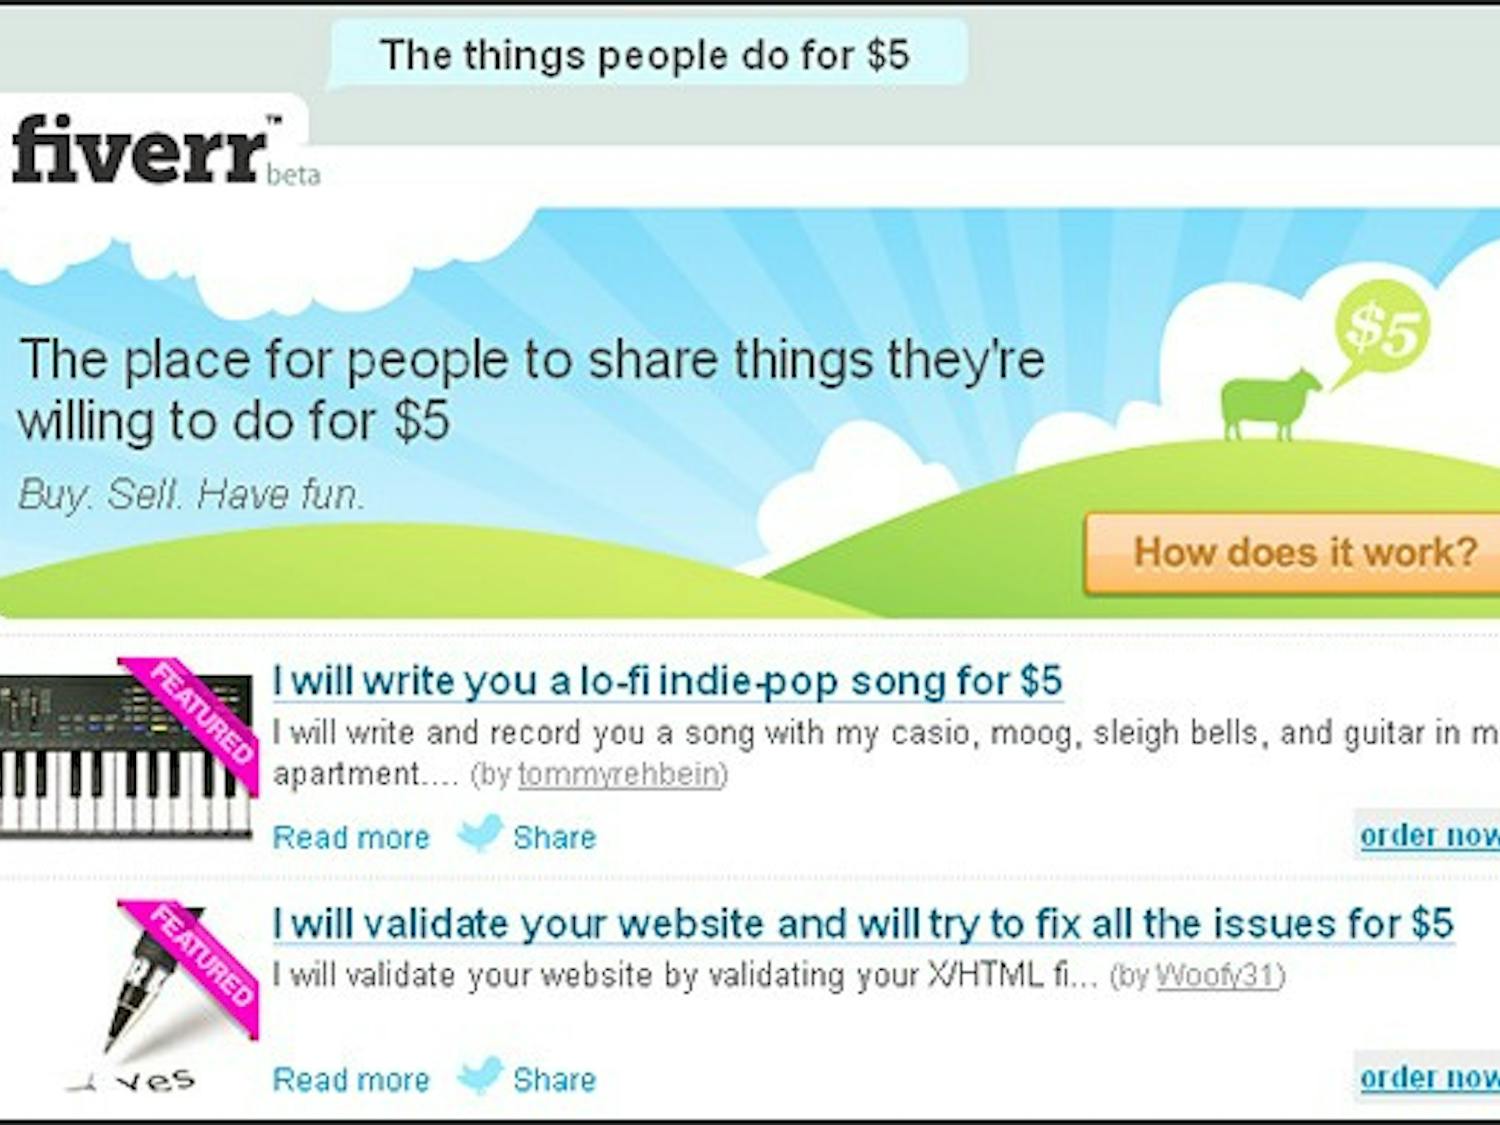 The front page of Fiverr.com.